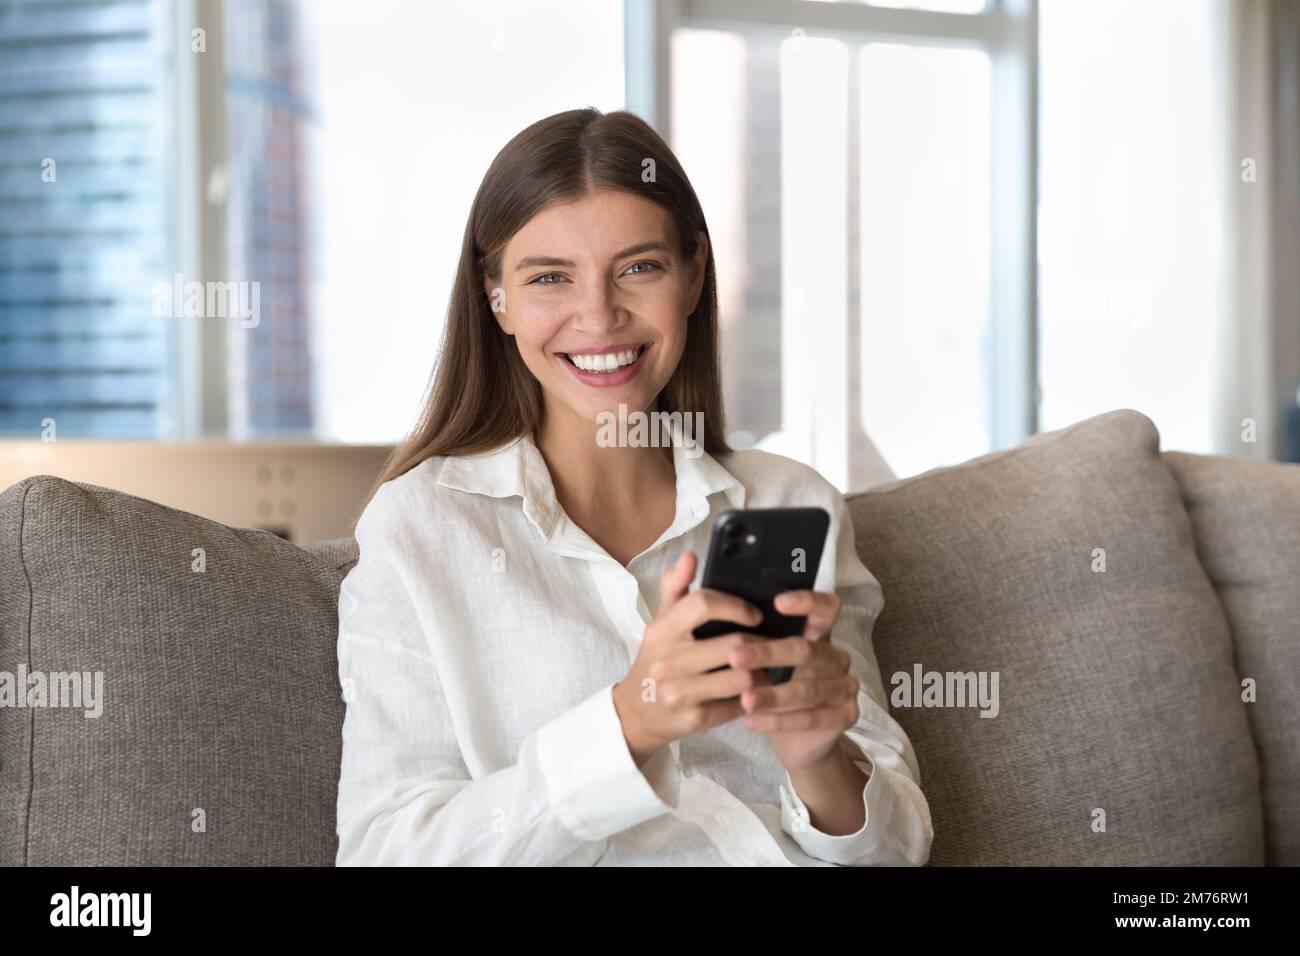 Woman sit on couch with cellphone smile looks at camera Stock Photo